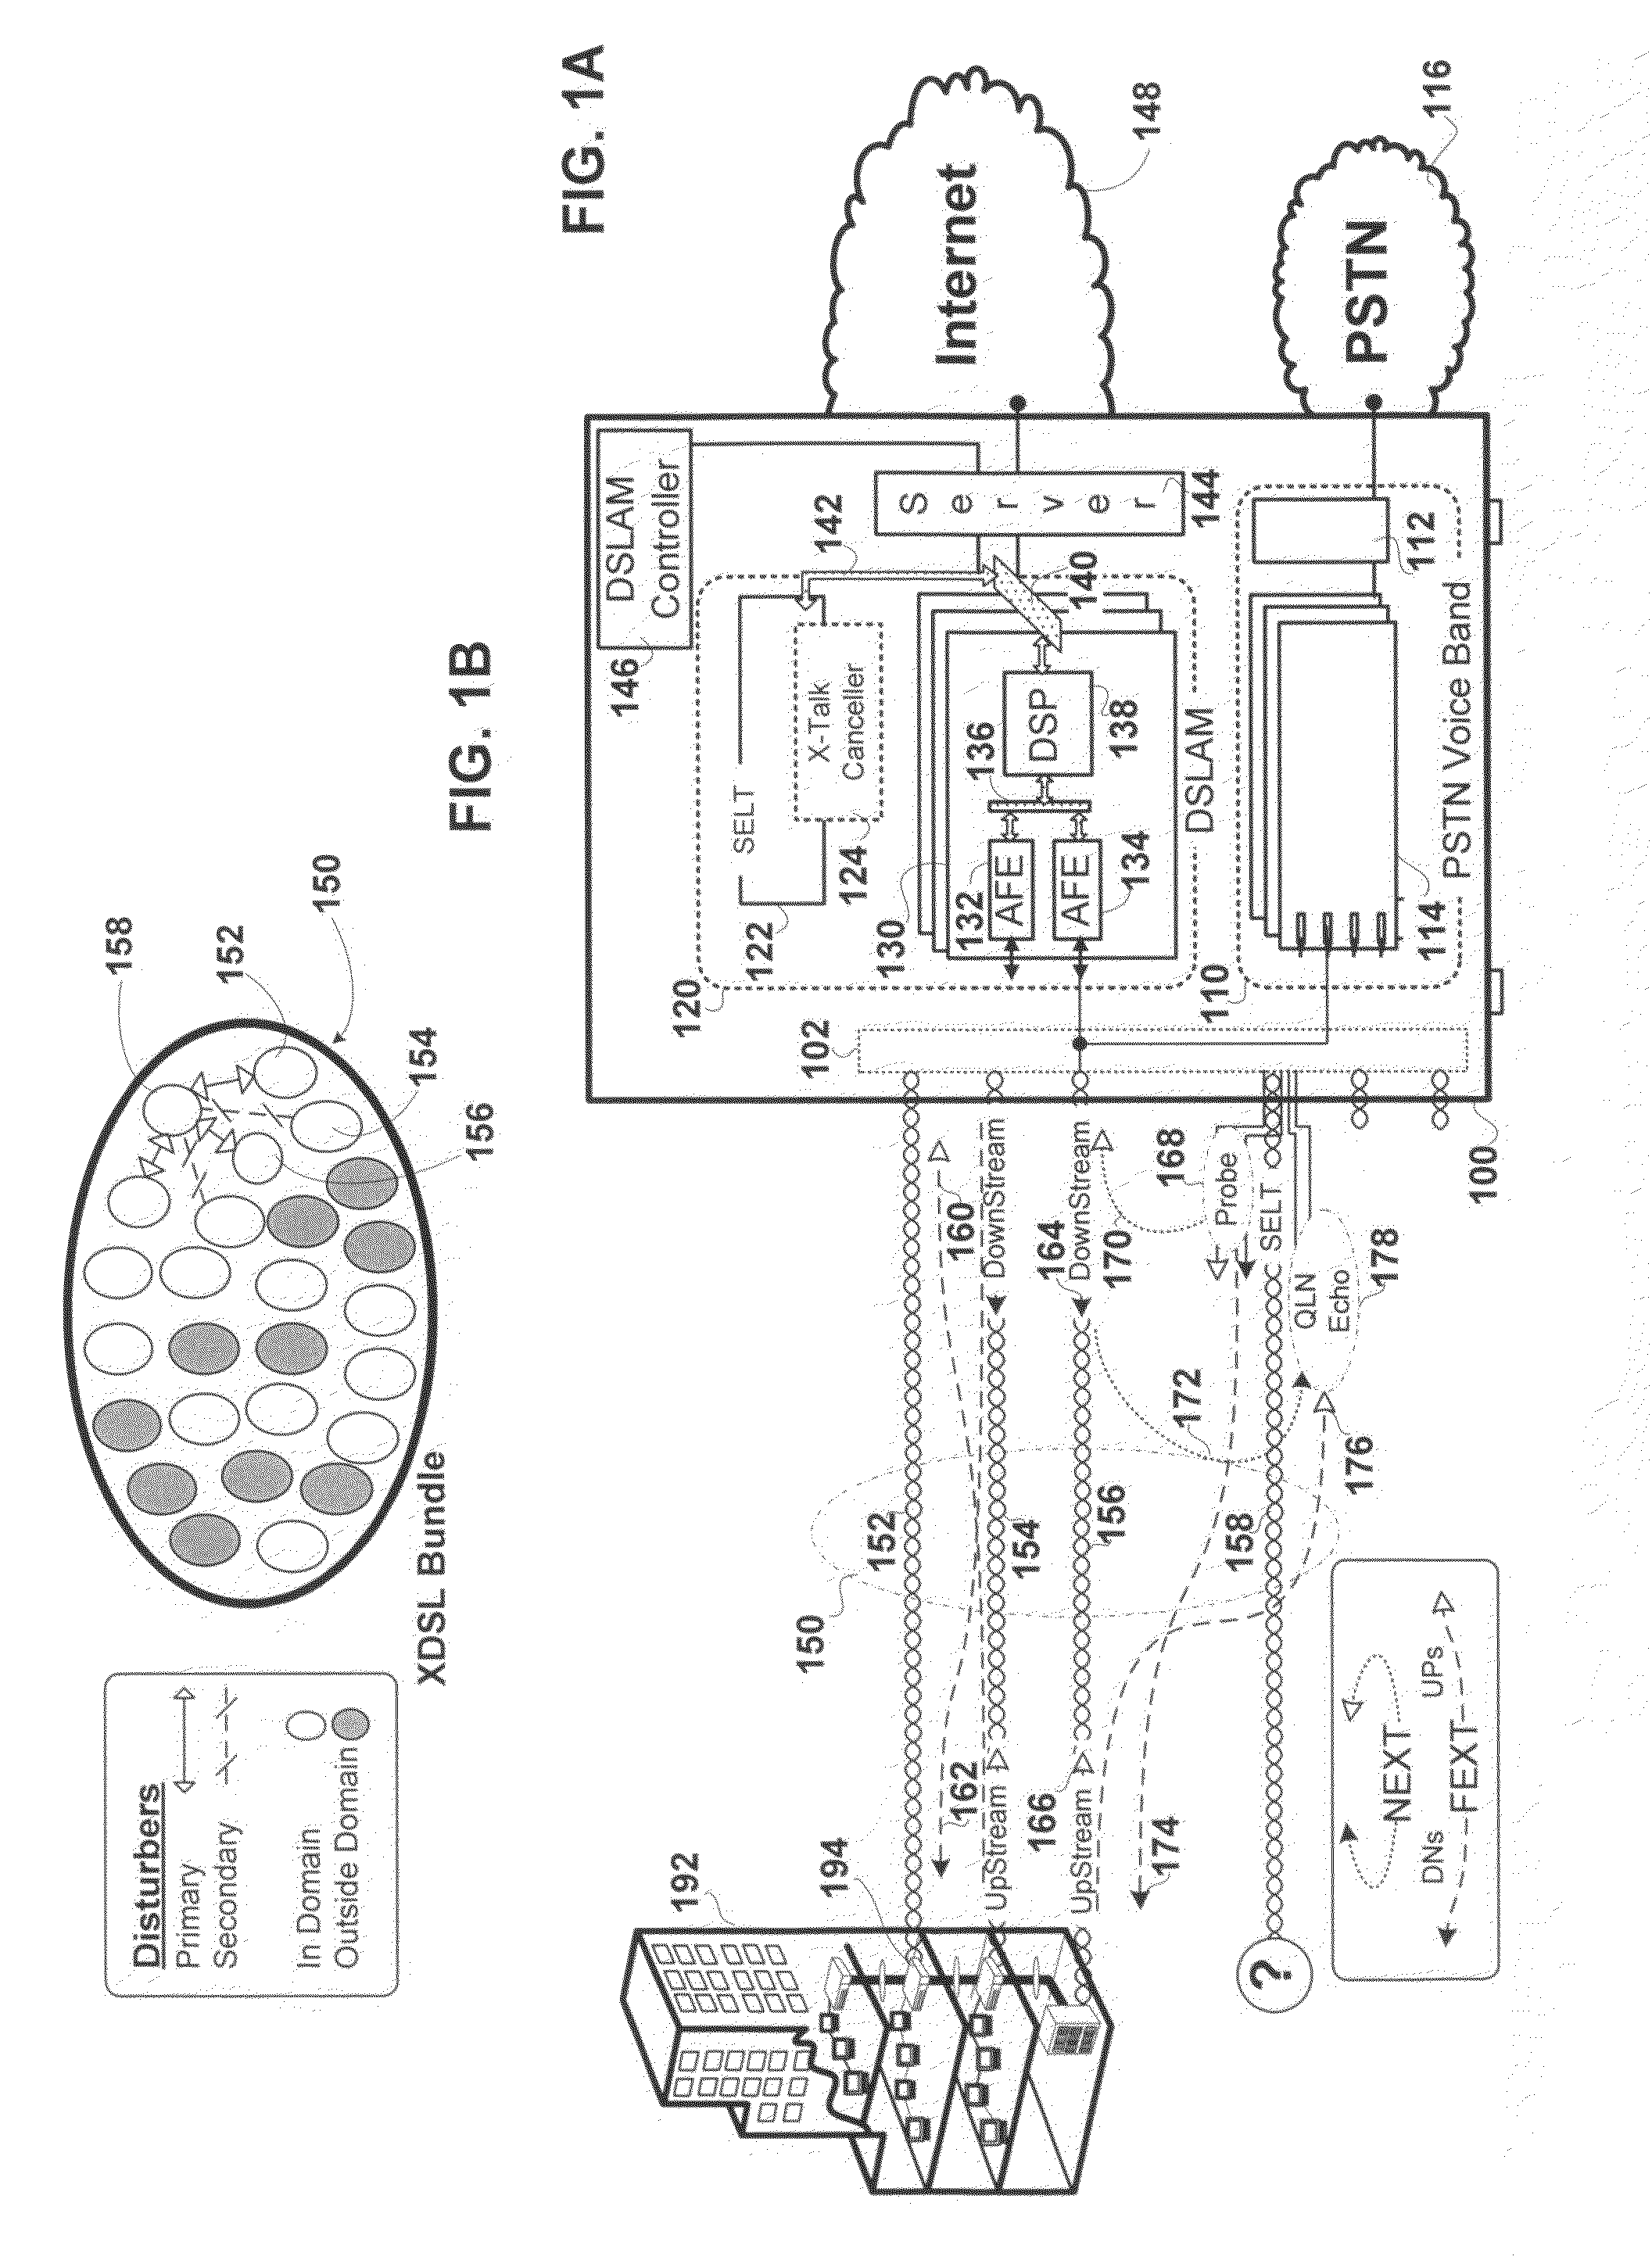 Method and apparatus for crosstalk cancellation during SELT testing